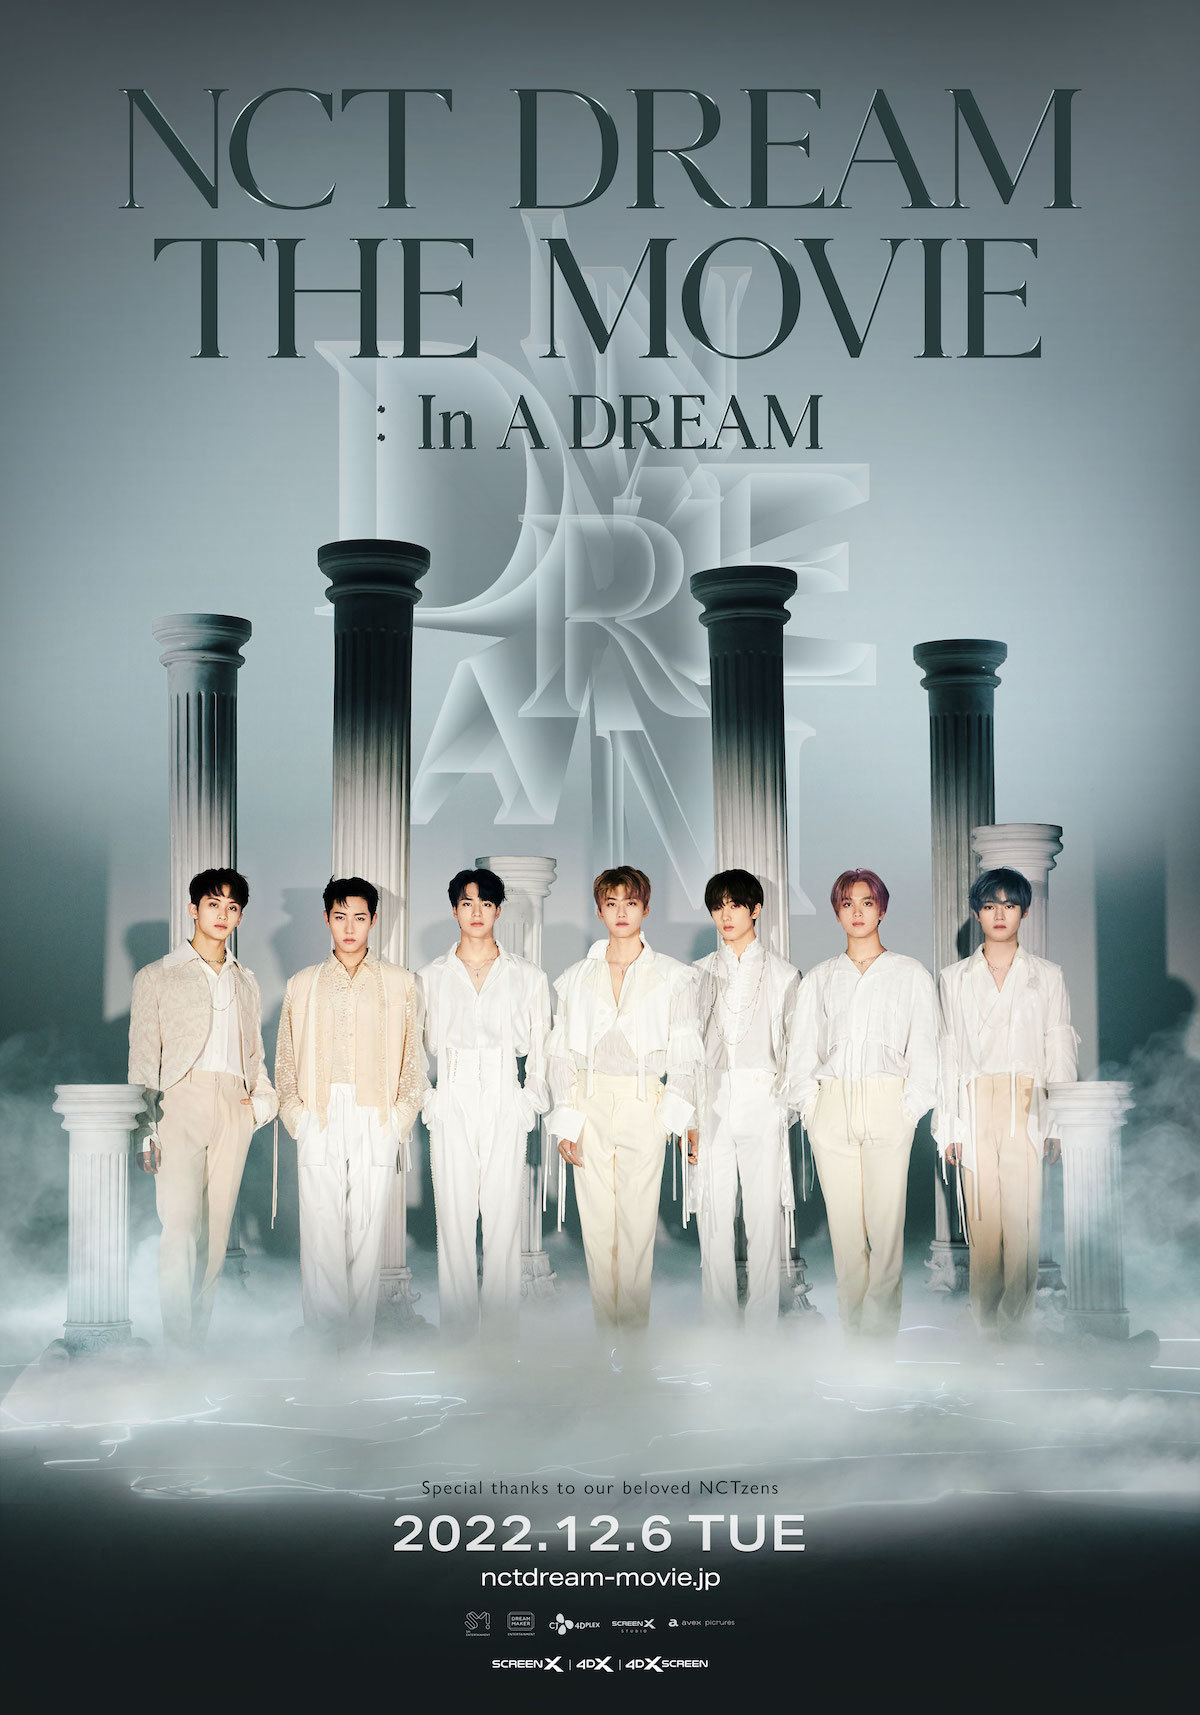 NCT DREAM、初の映画『NCT DREAM THE MOVIE：In A DREAM』のメイン